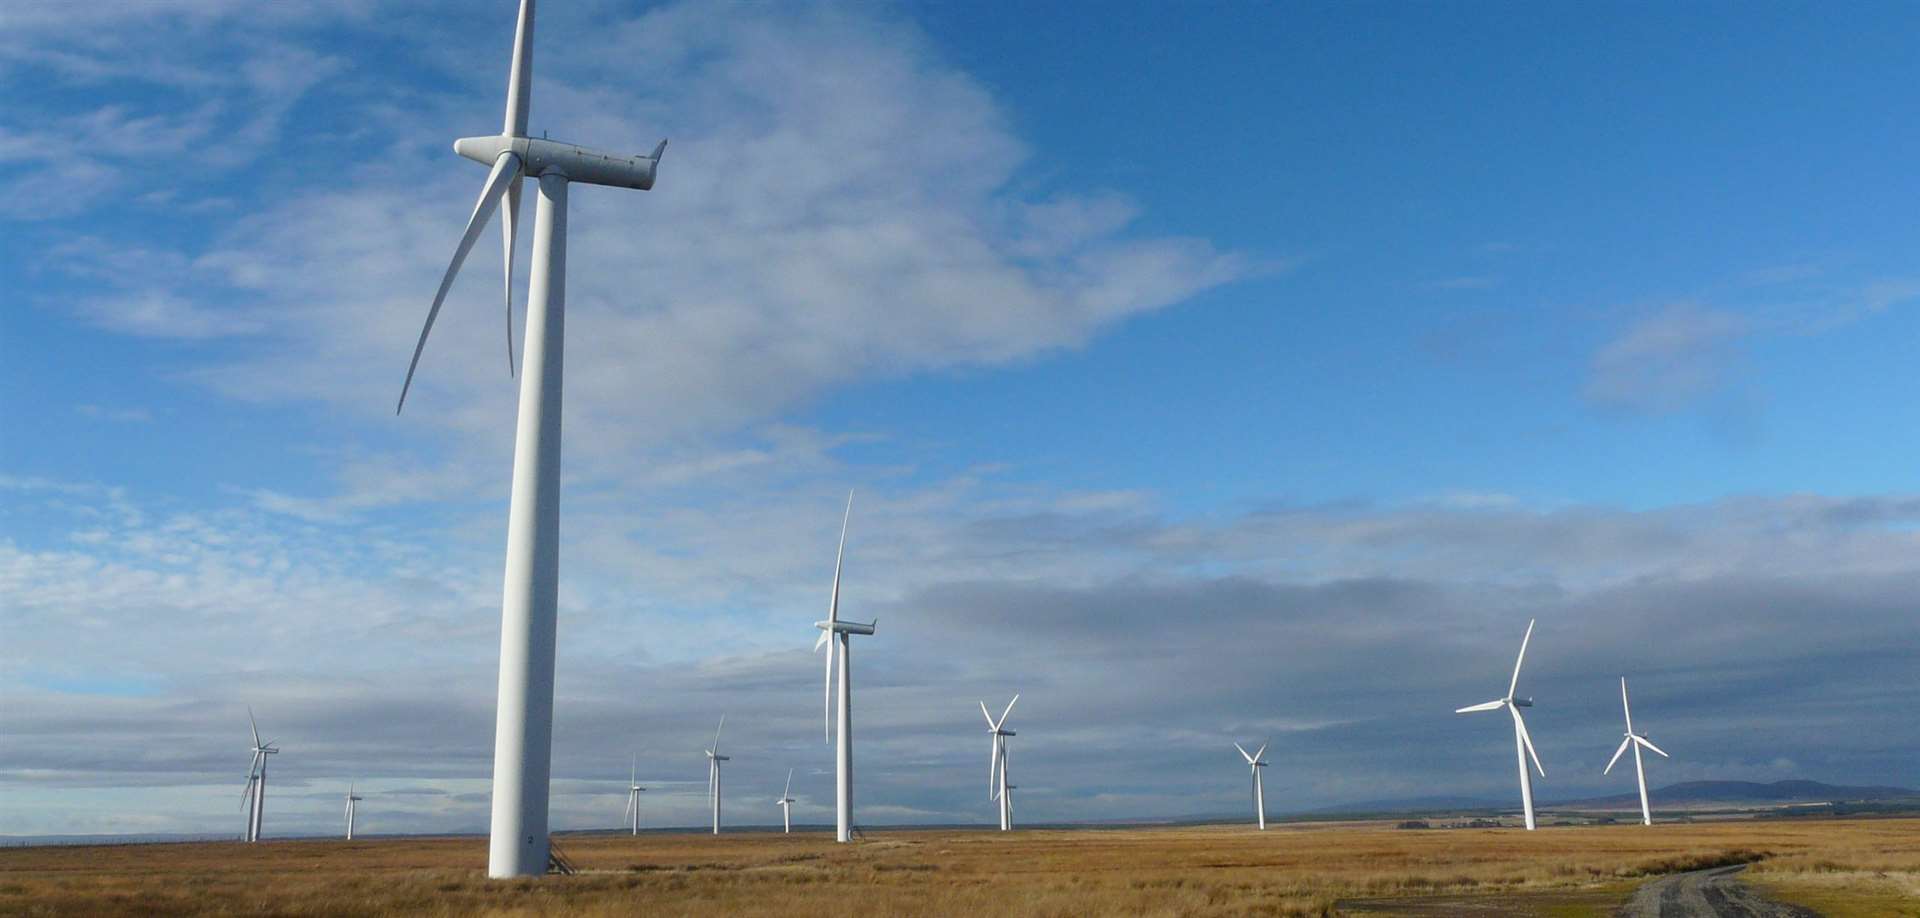 The battery storage system would be located north of the wind farm at the Causewaymire. Picture: Alan Hendry